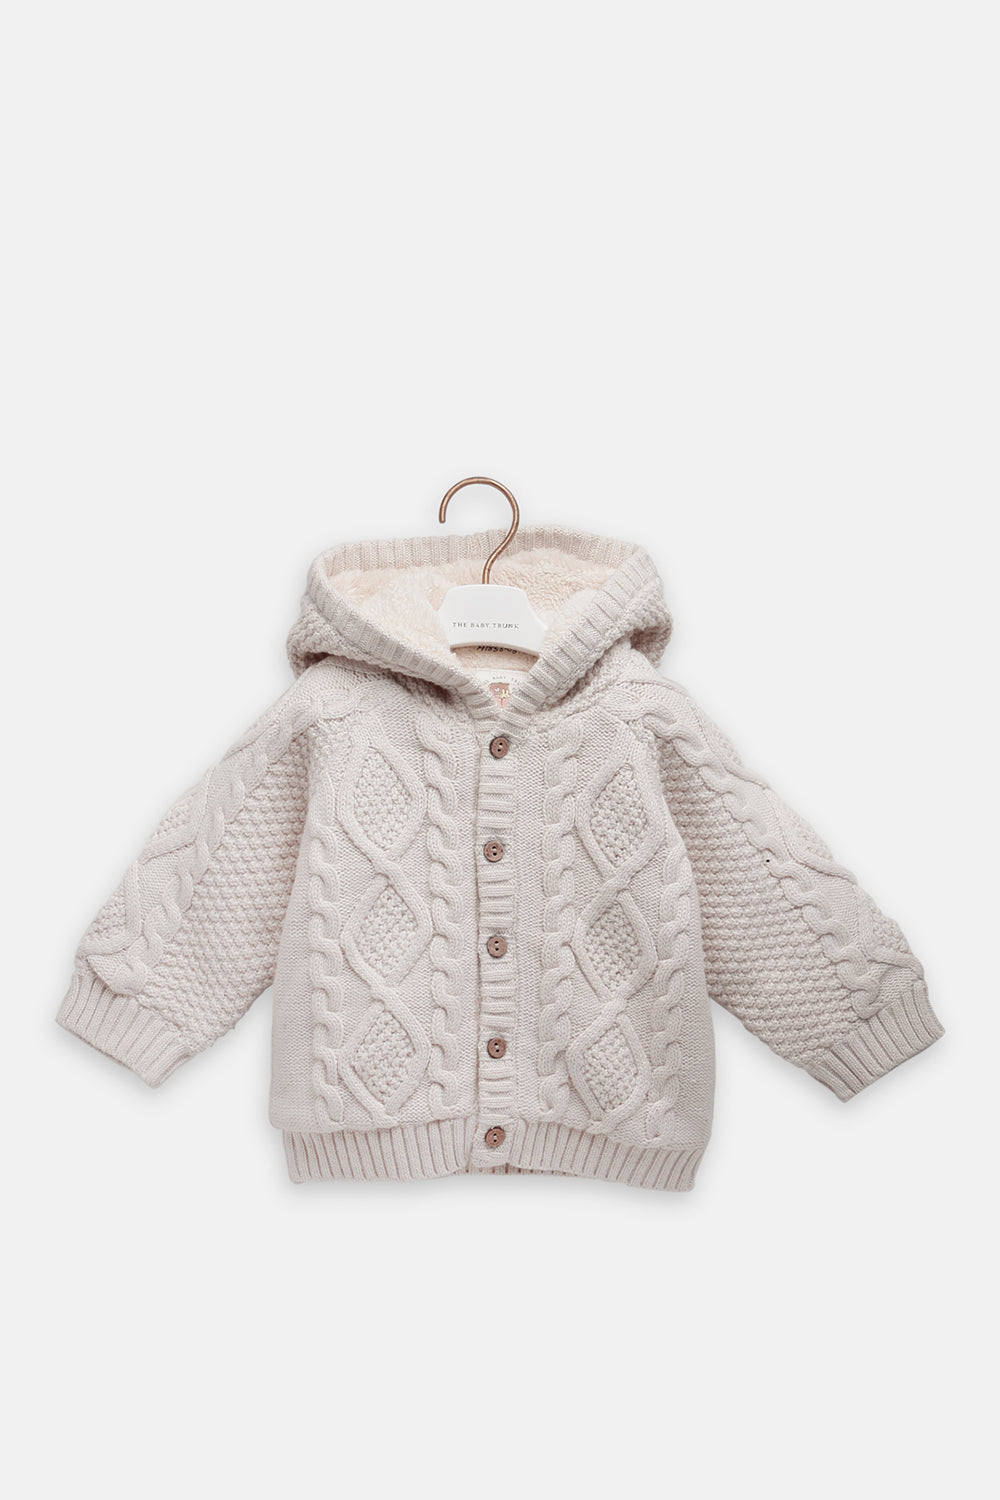 Baby Unisex Winter Cable Knit Cardigan